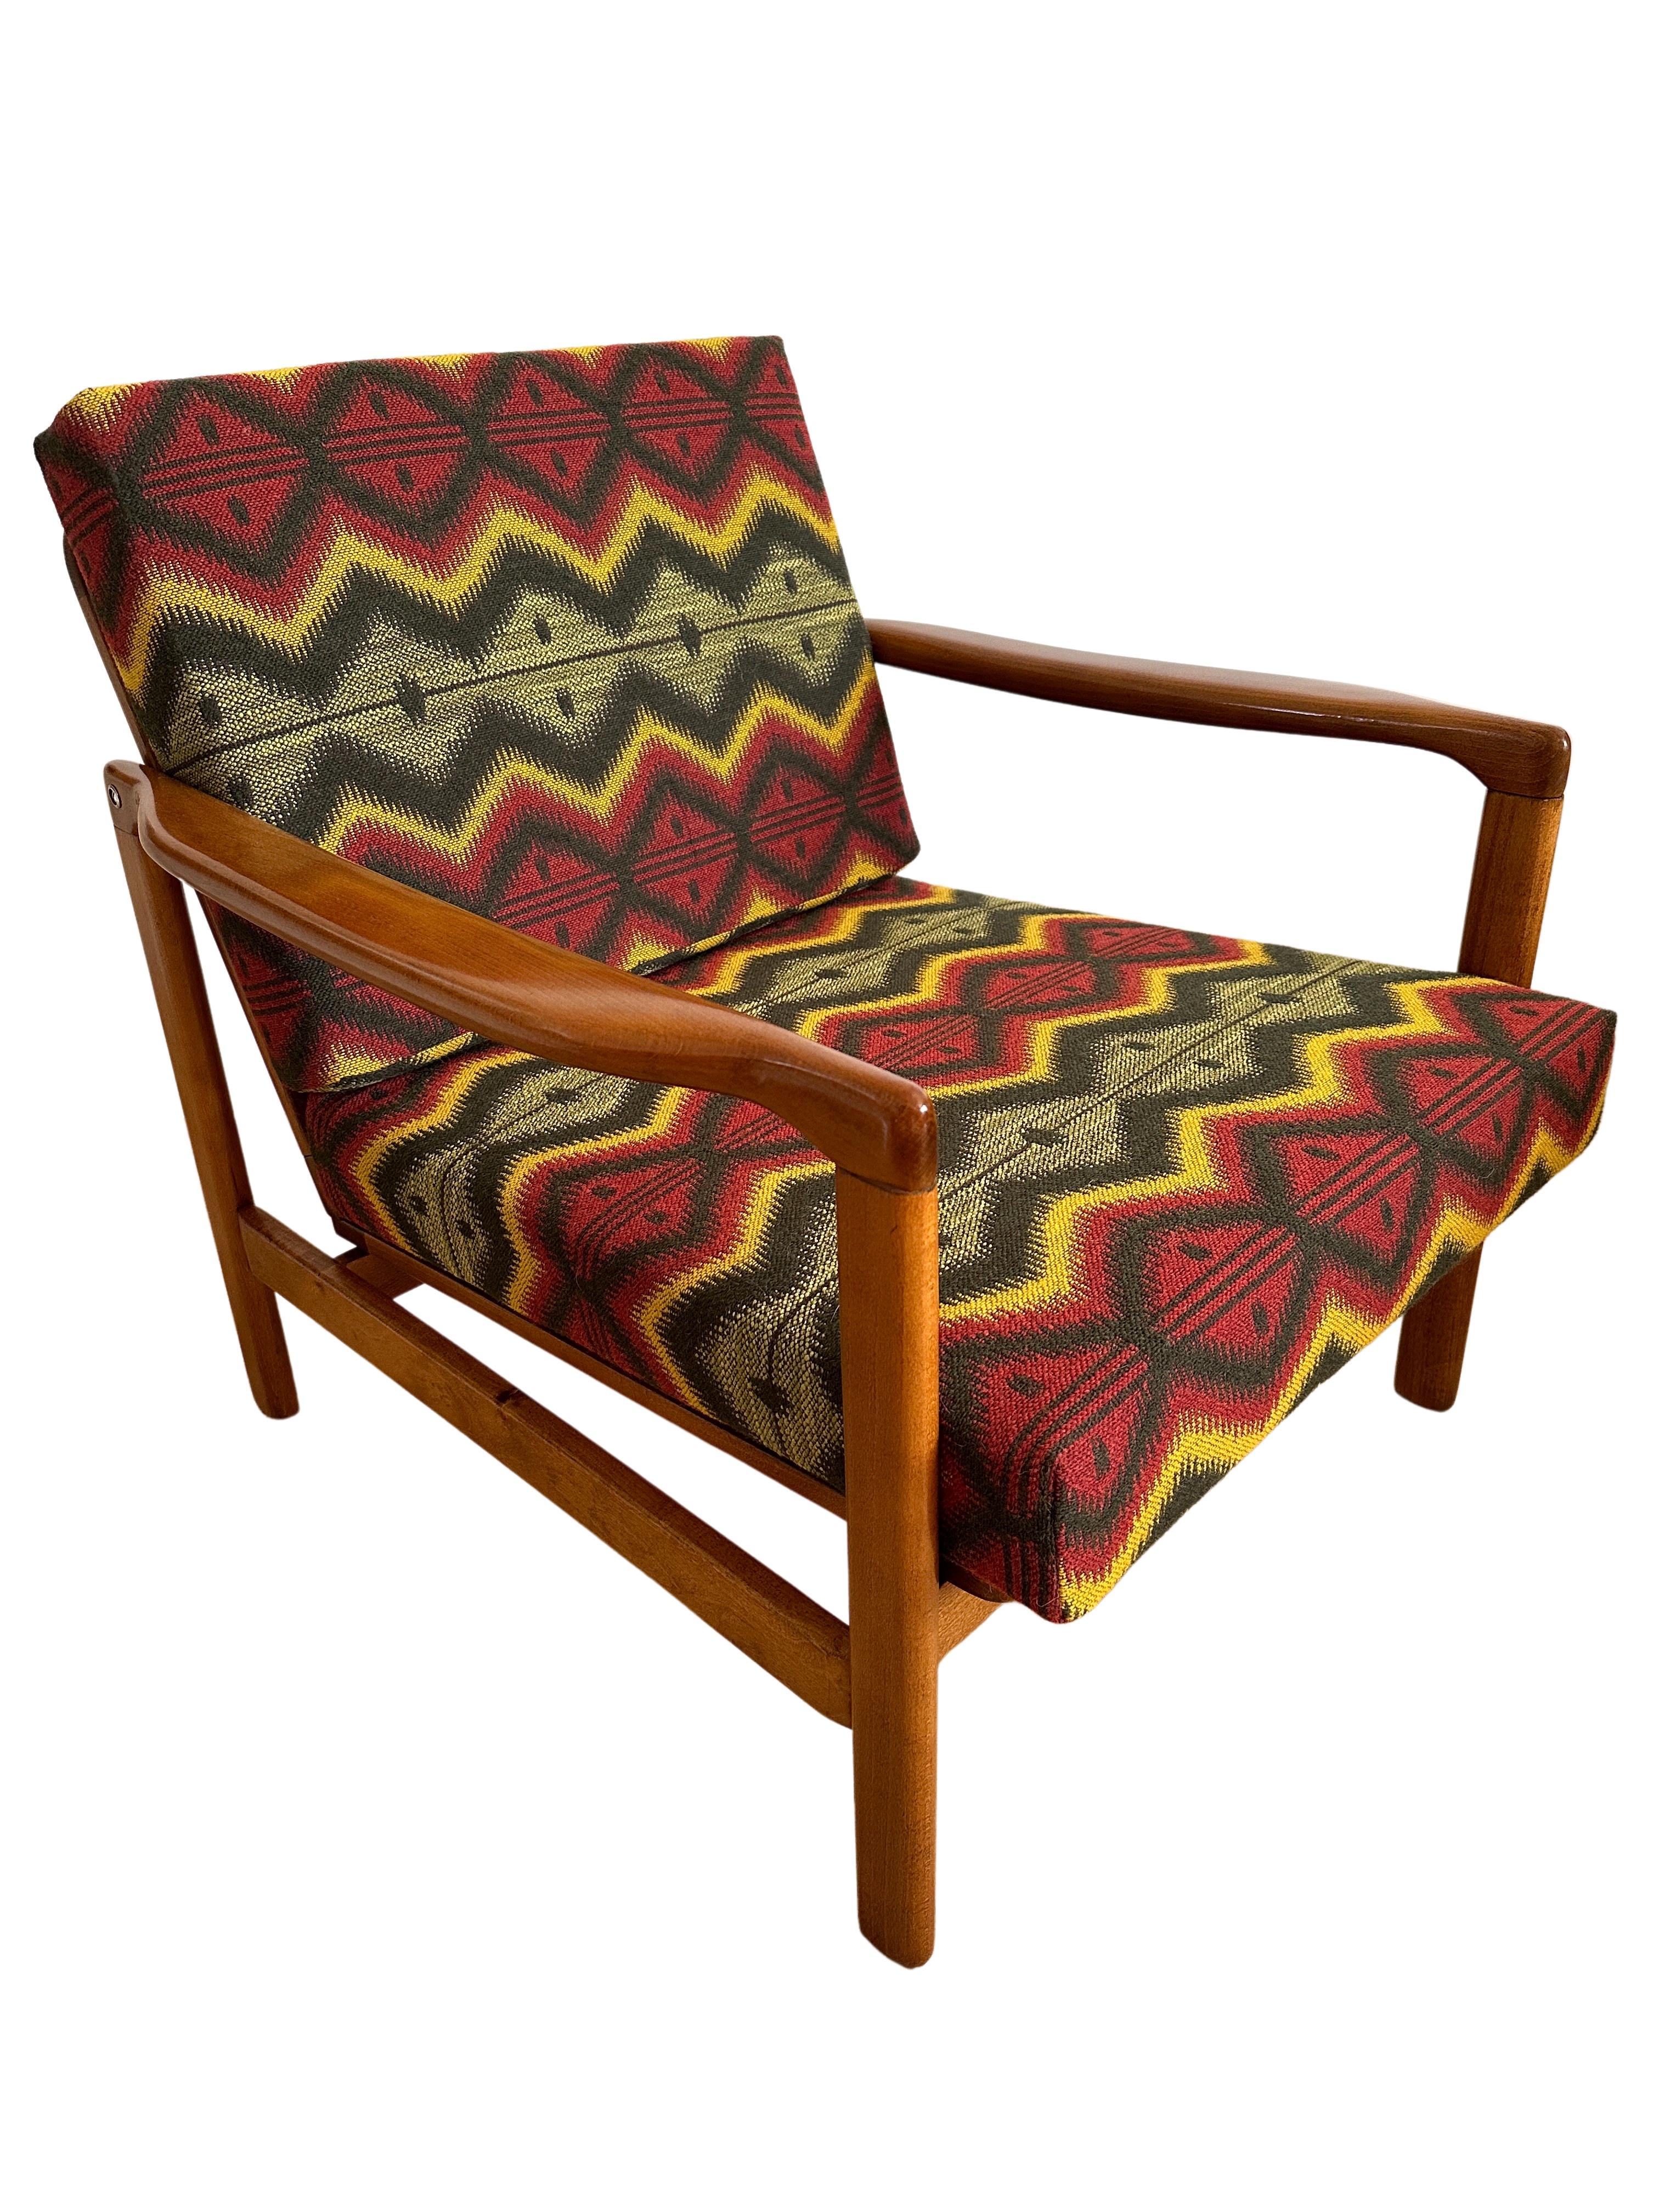 Midcentury Armchair by Zenon Bączyk, Mind the Gap Upholstery, Europe, 1960s For Sale 4